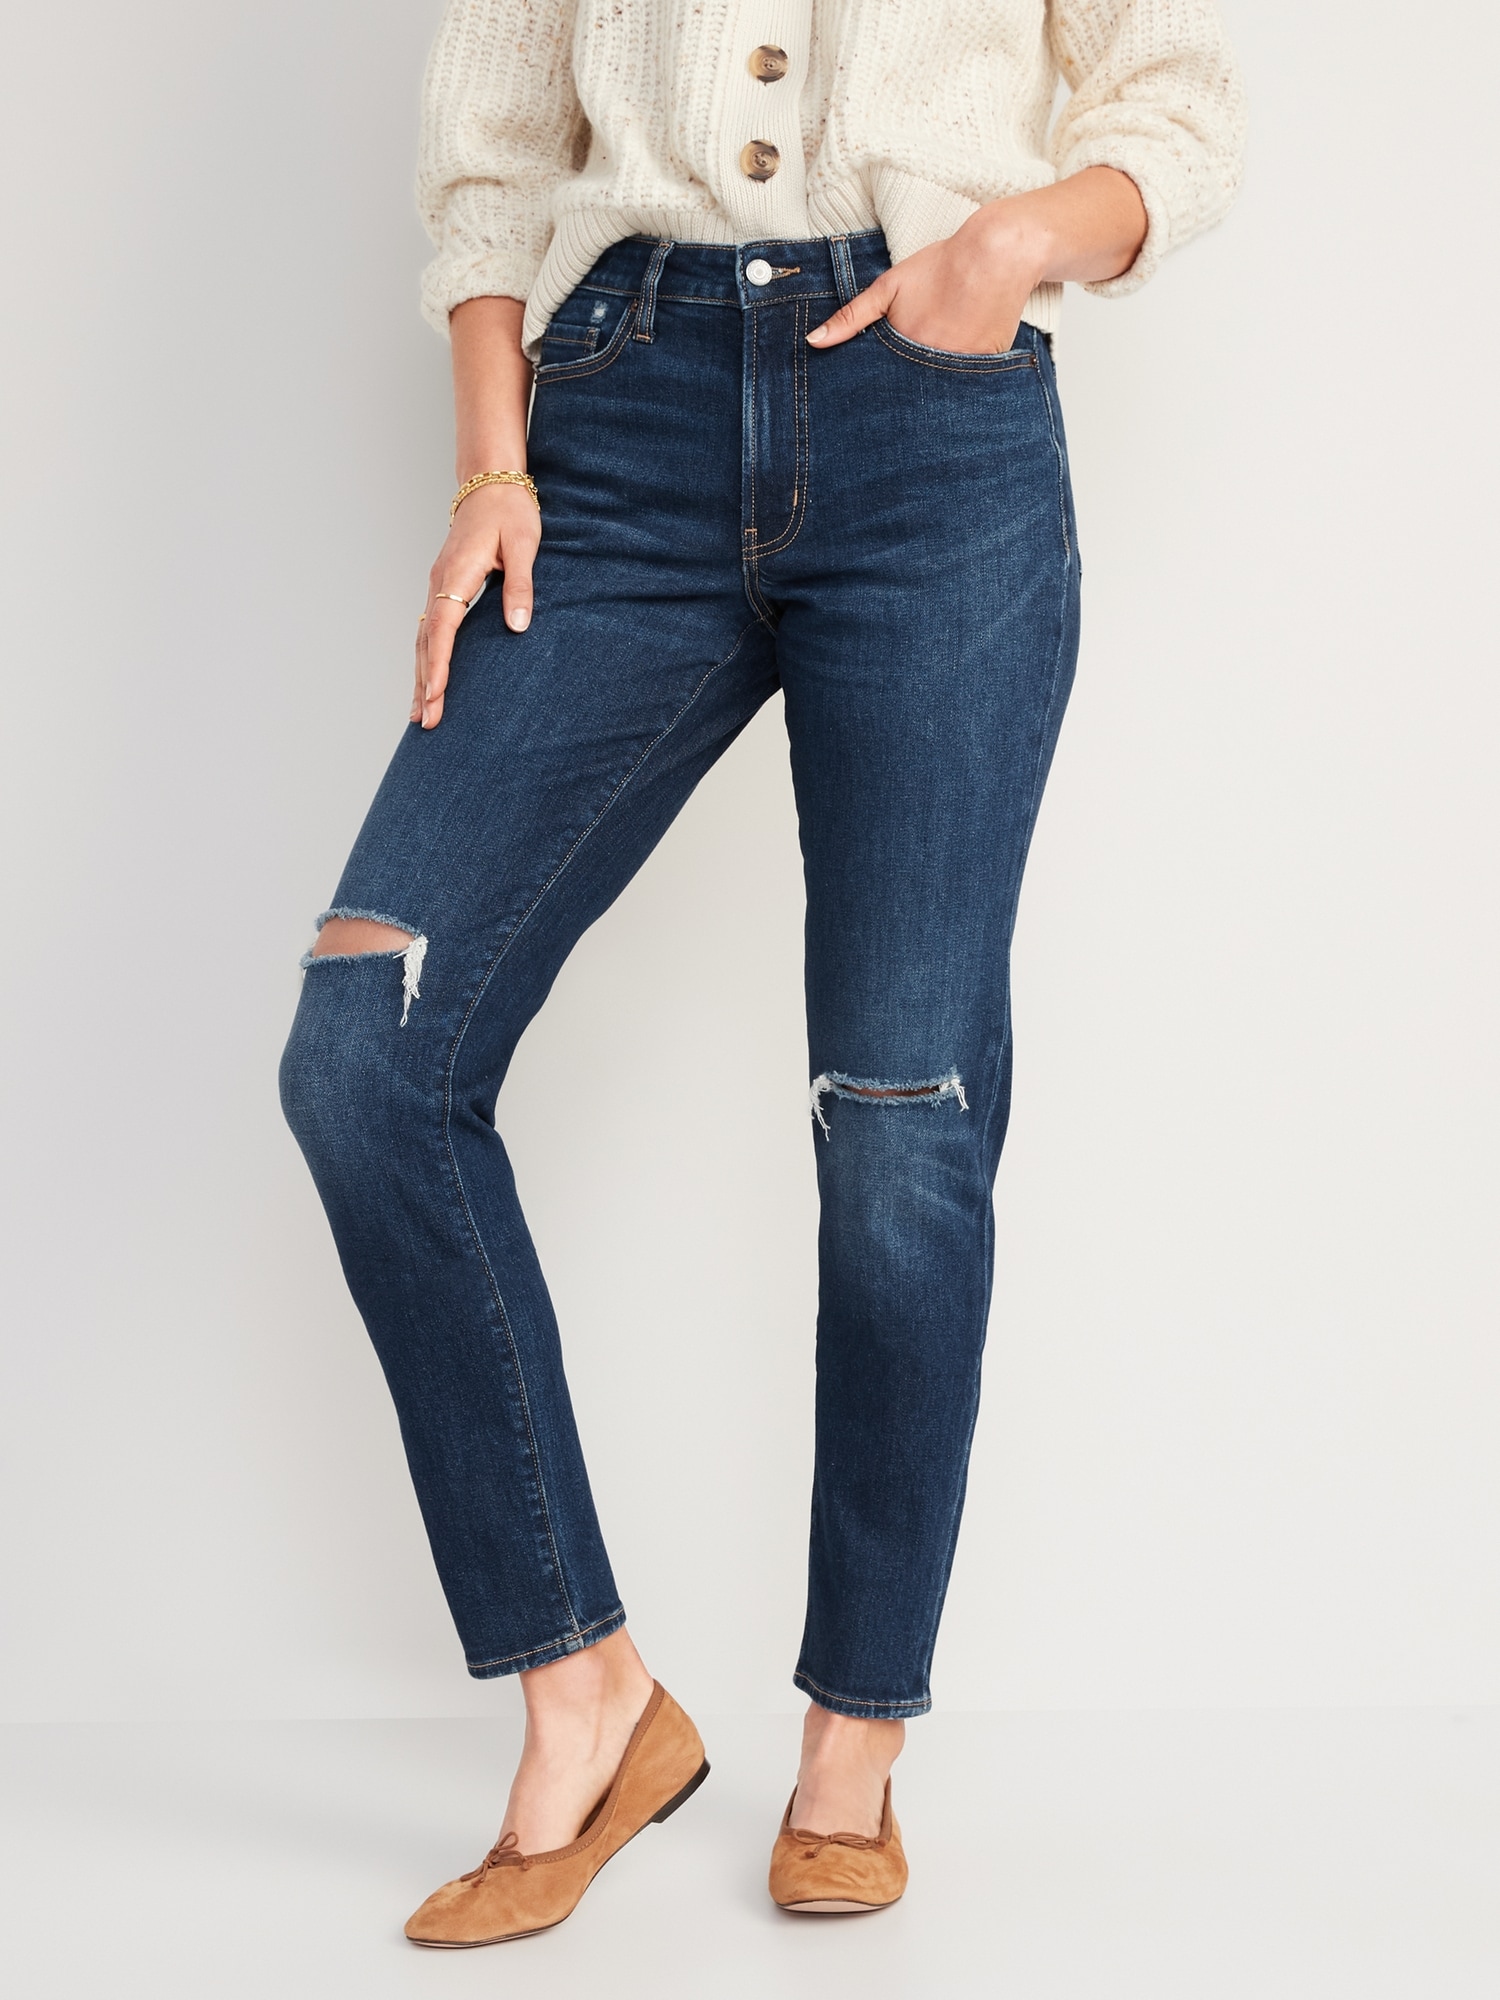 Old Navy High-Waisted OG Straight Ripped Jeans for Women blue. 1